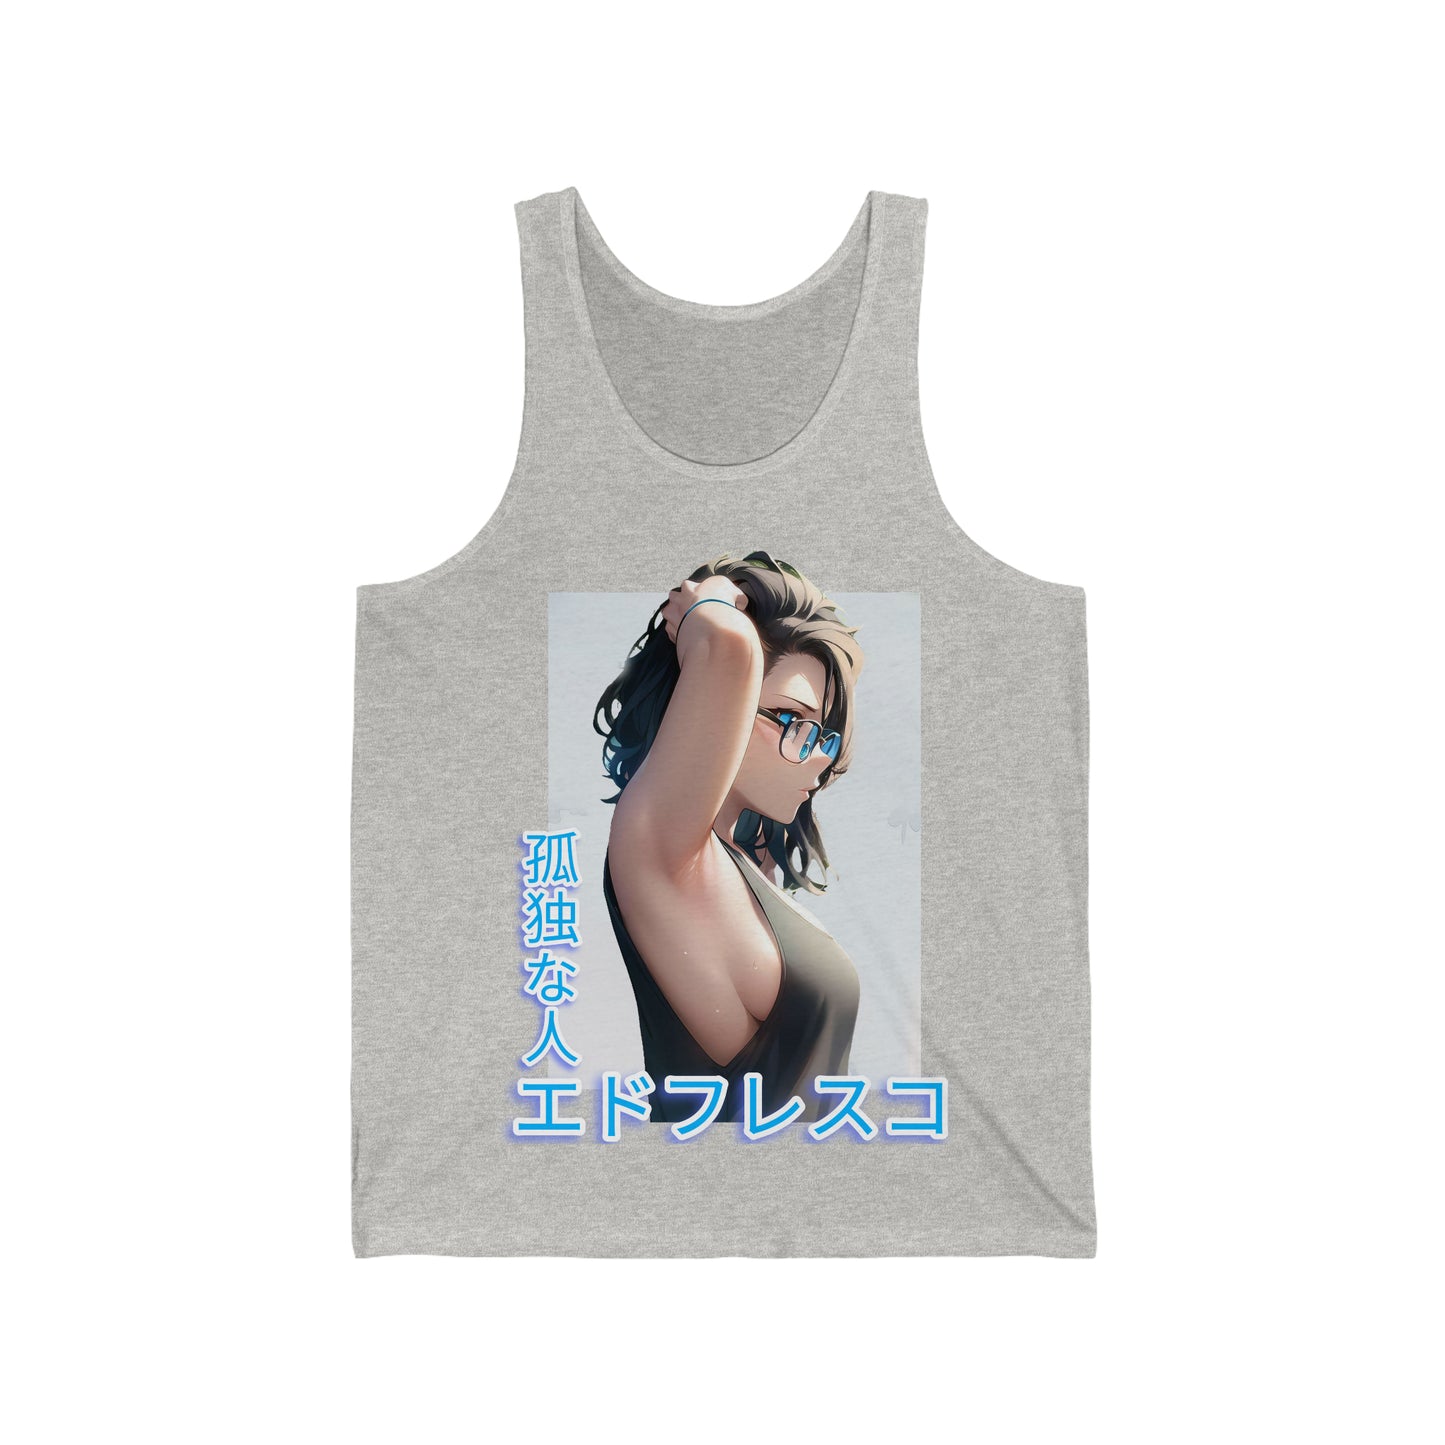 Anime Style Art Unisex Jersey Tank- "Front Cover Chick"